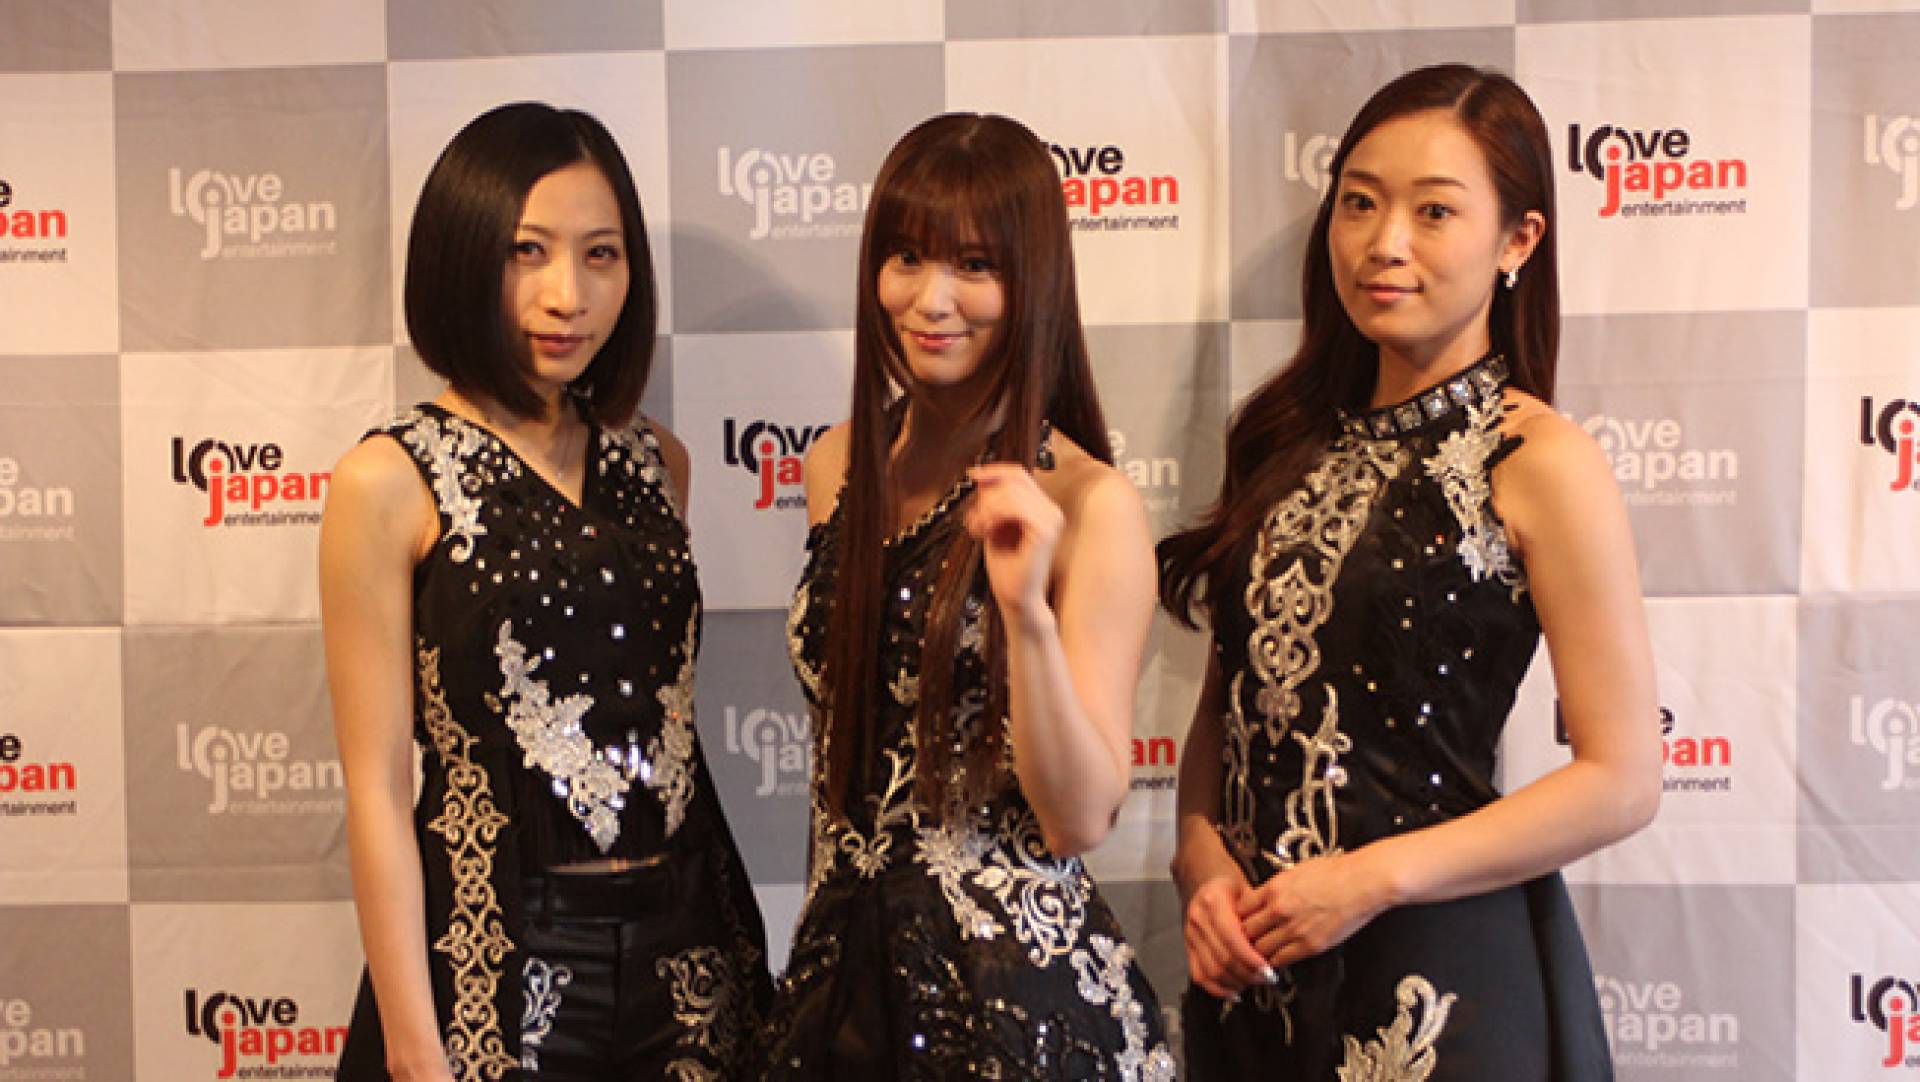 Press Conference With Kalafina In Mexico